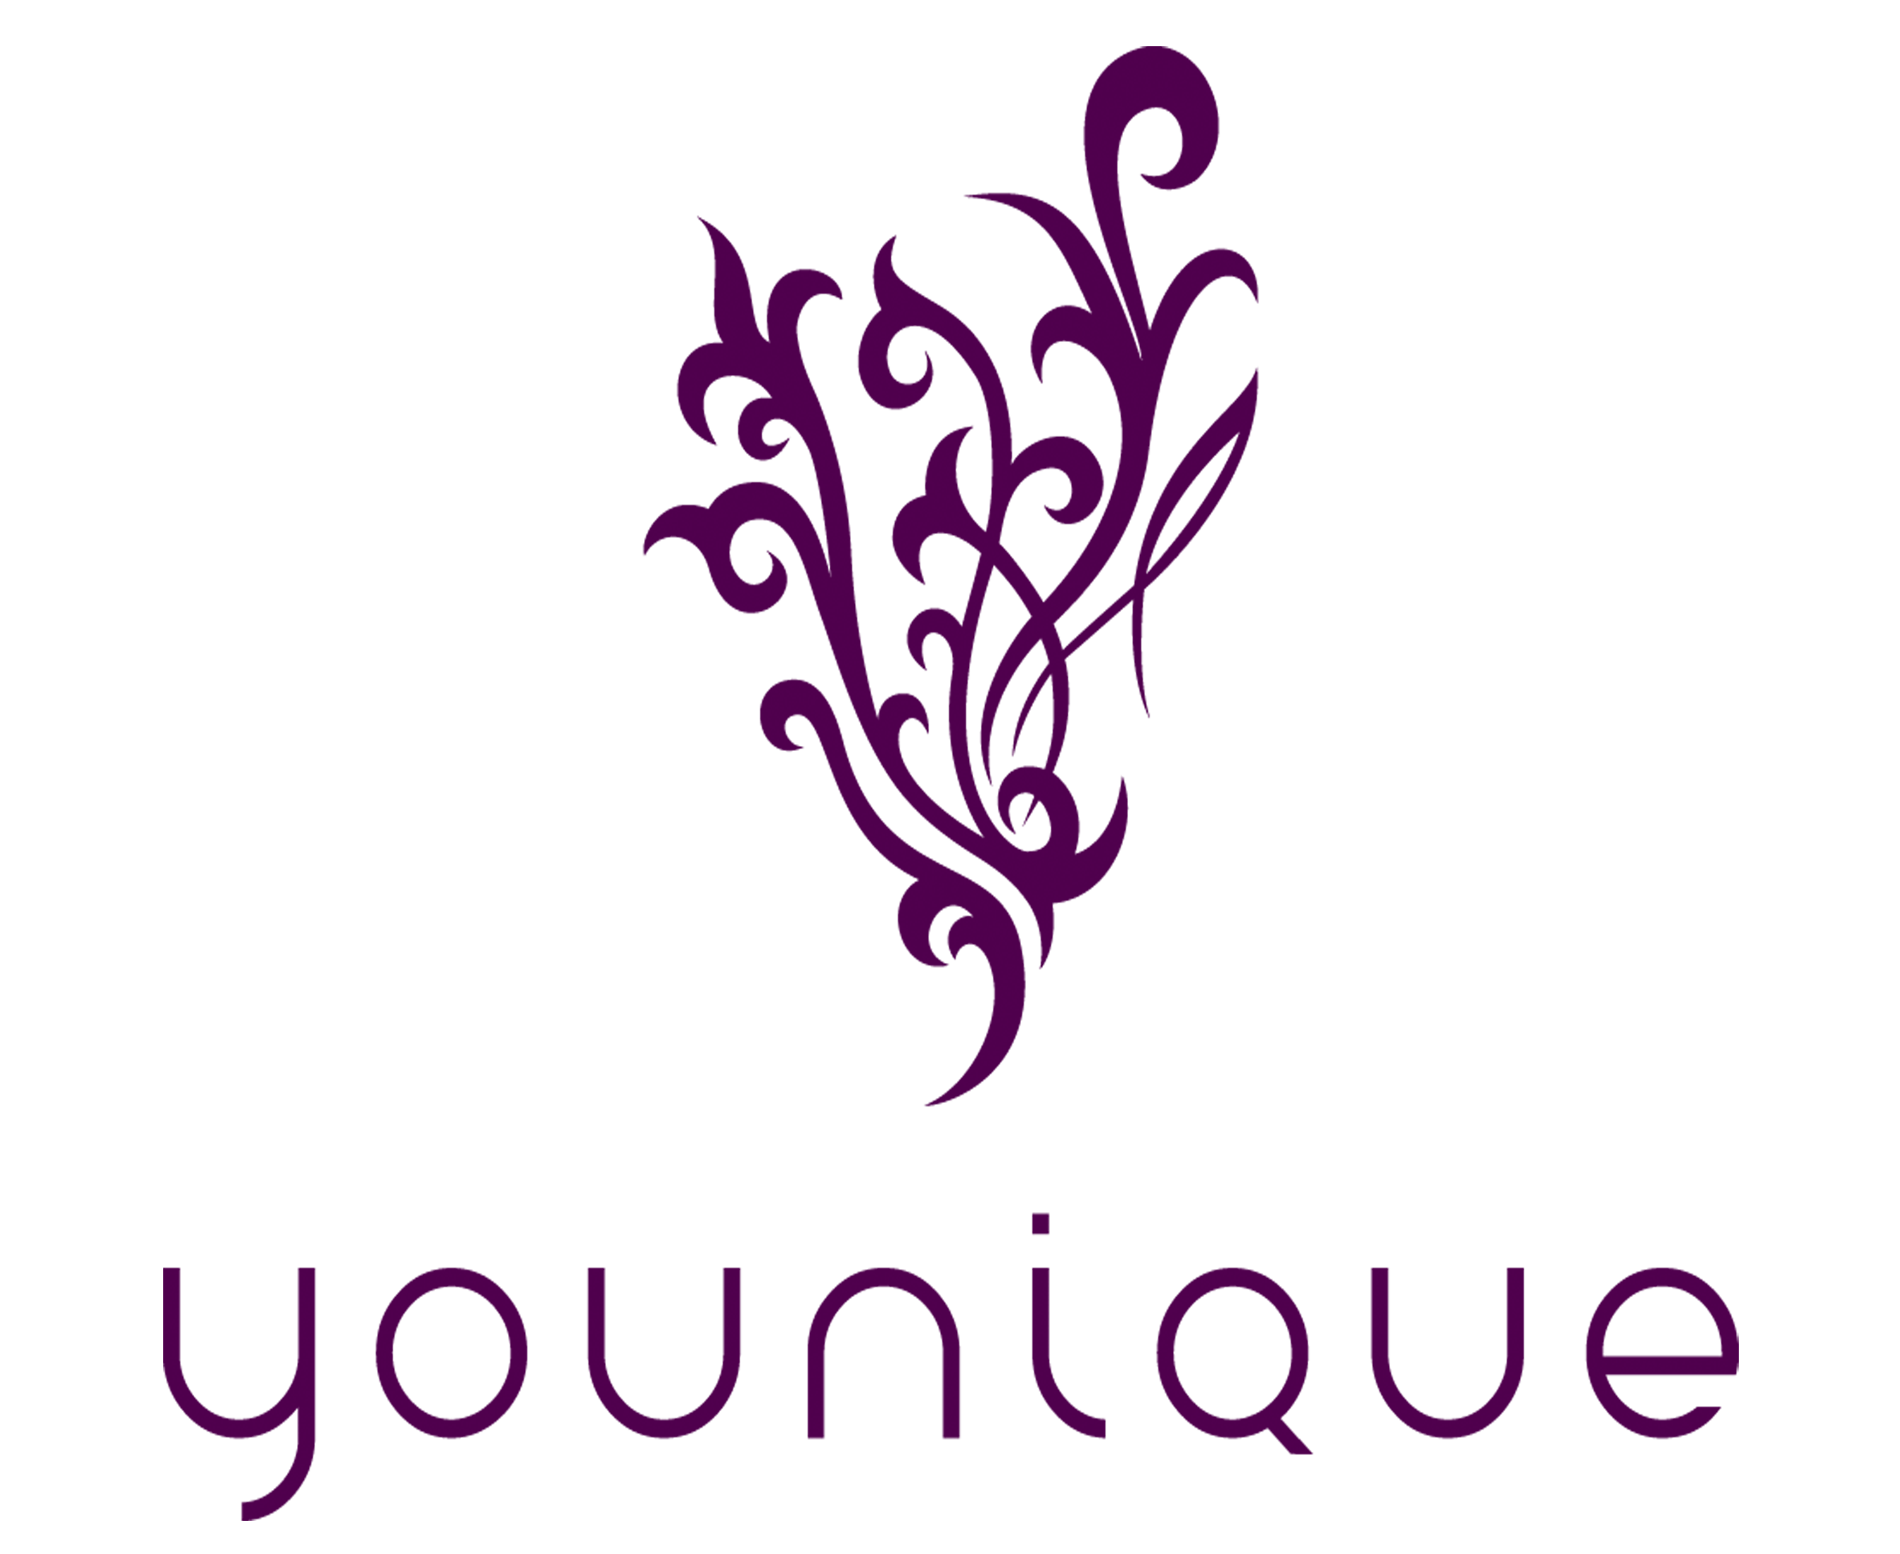 Younique Logo - Younique Logo, Younique Symbol, Meaning, History and Evolution